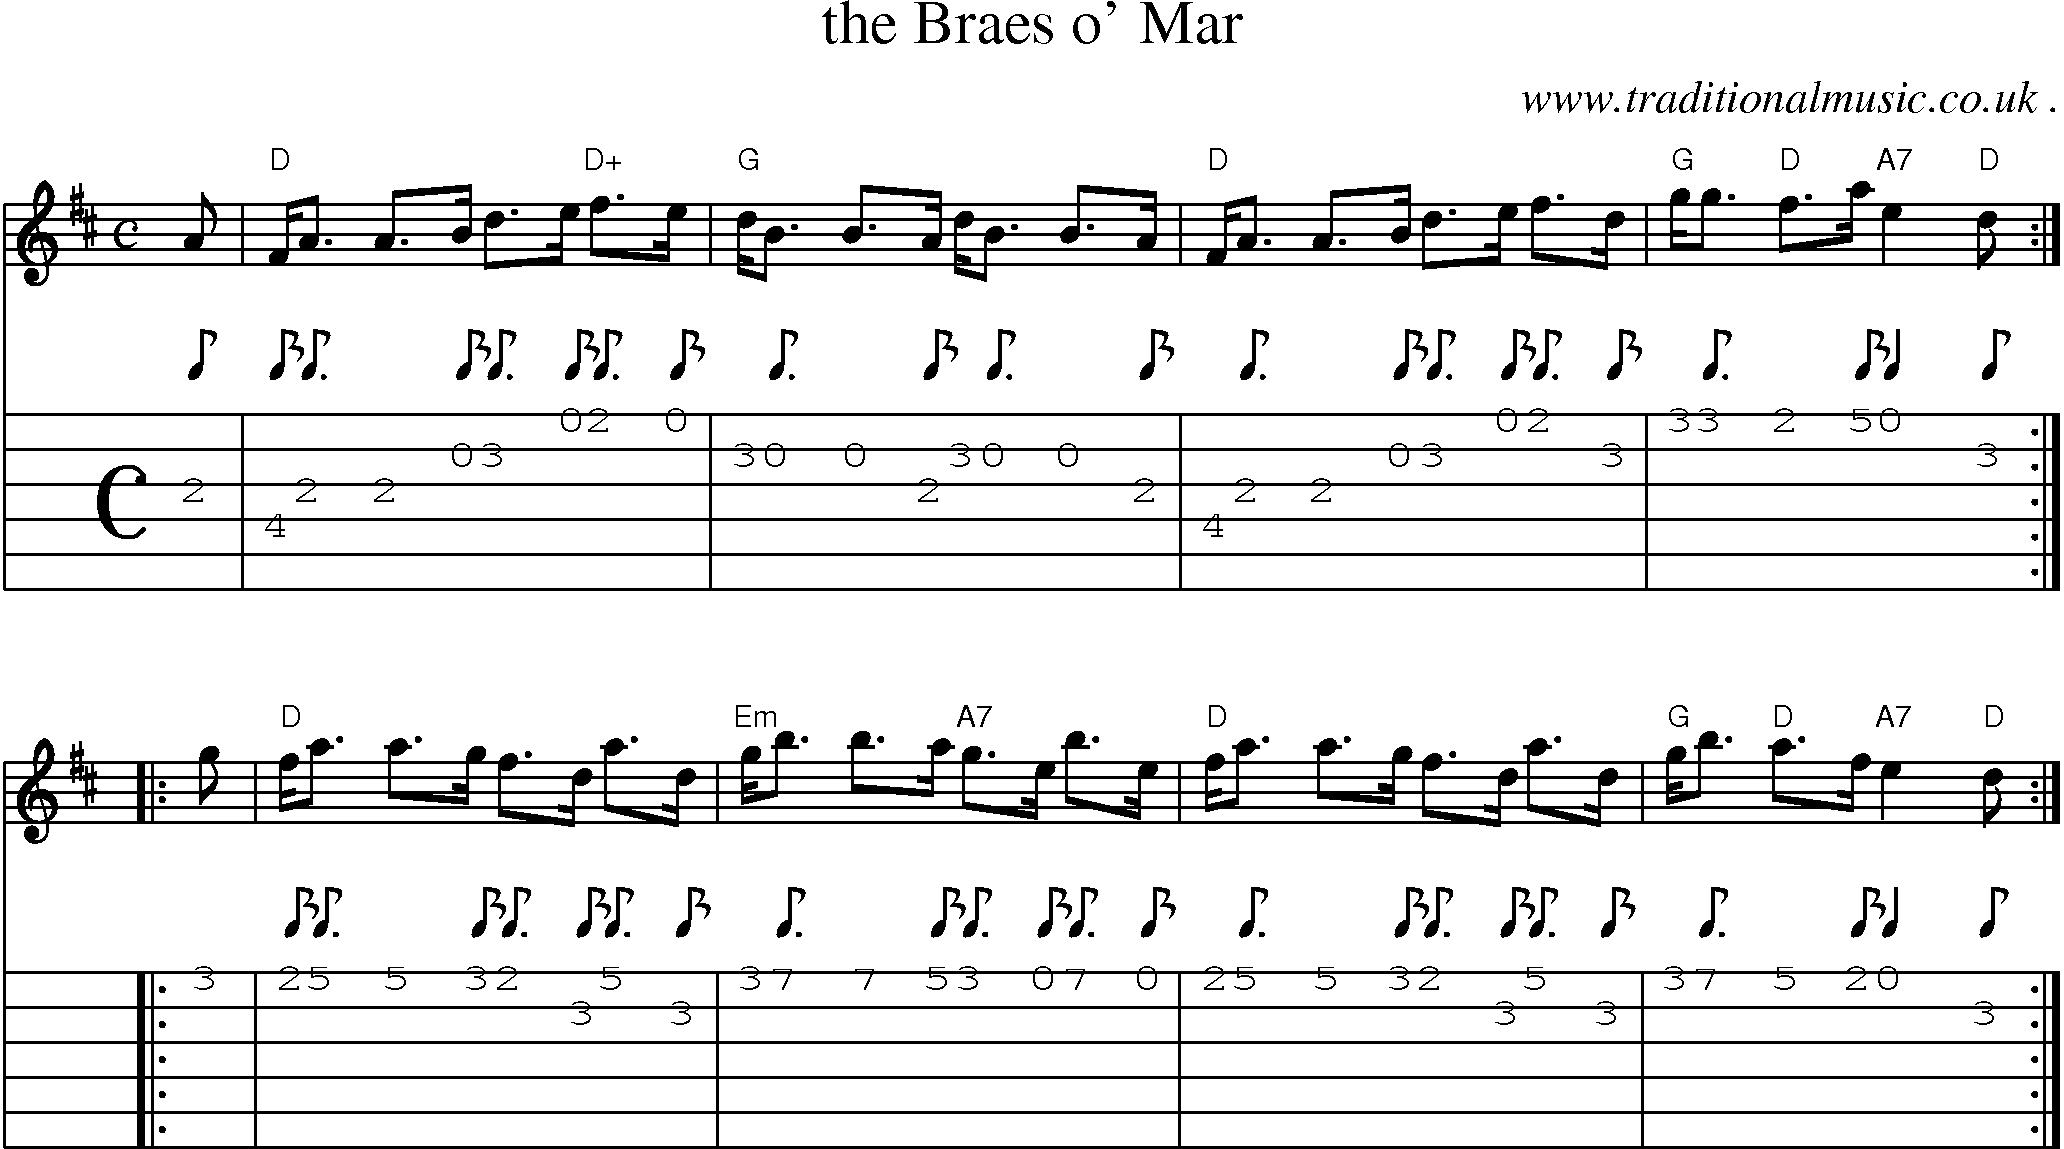 Sheet-music  score, Chords and Guitar Tabs for The Braes O Mar